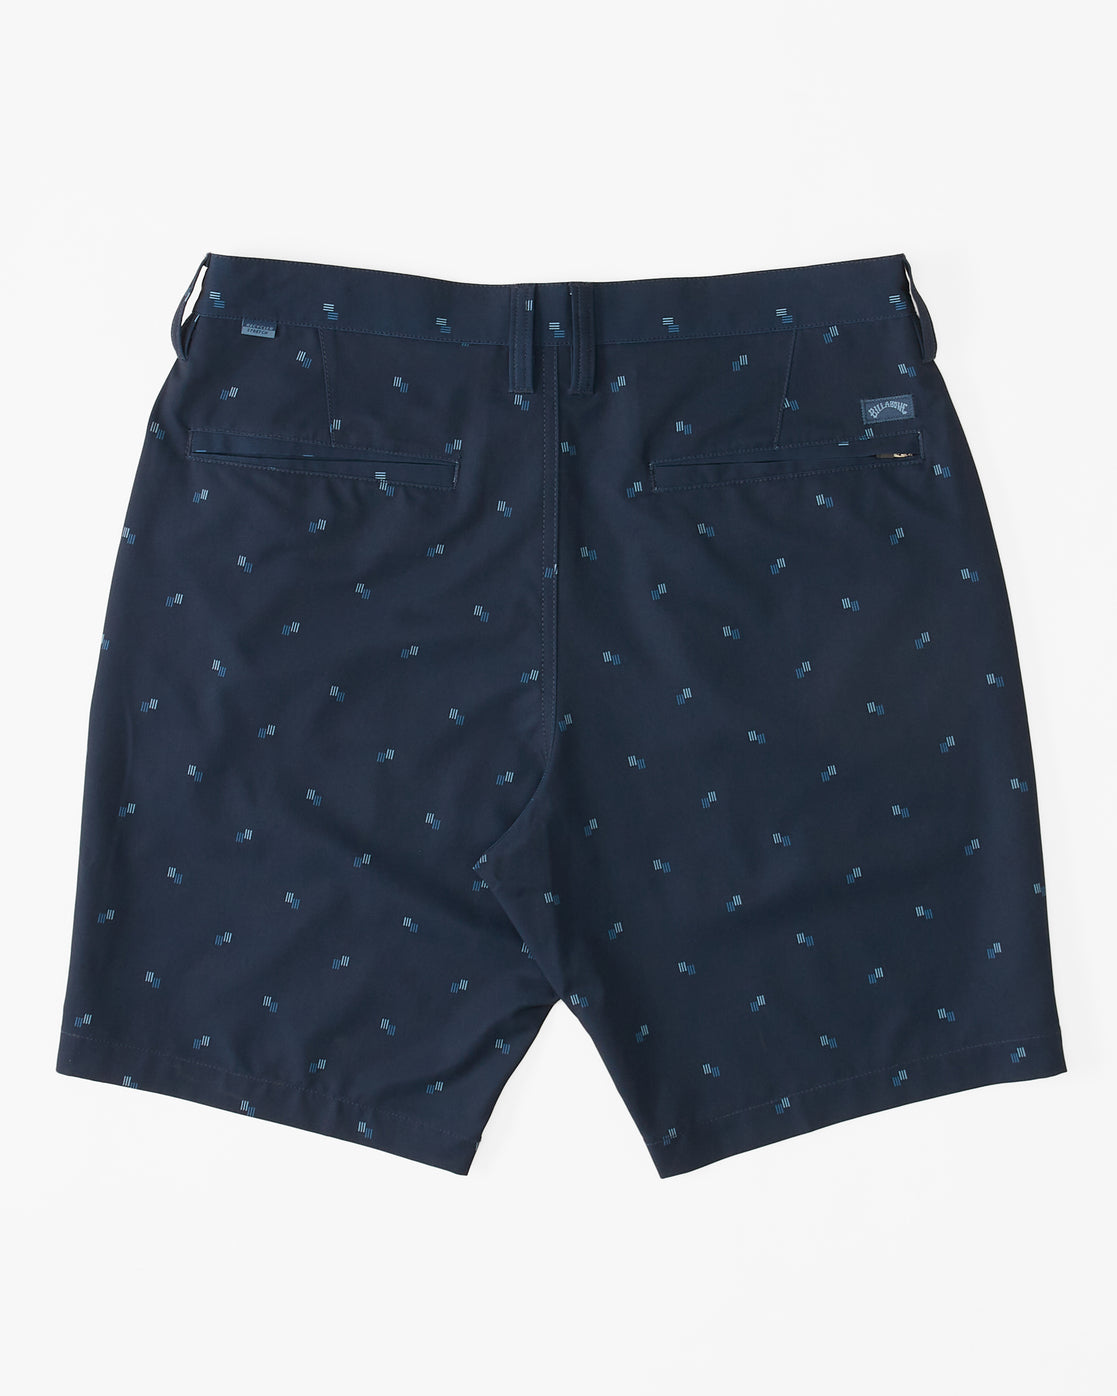 Crossfire Mid Submersible 19" Shorts - Navy